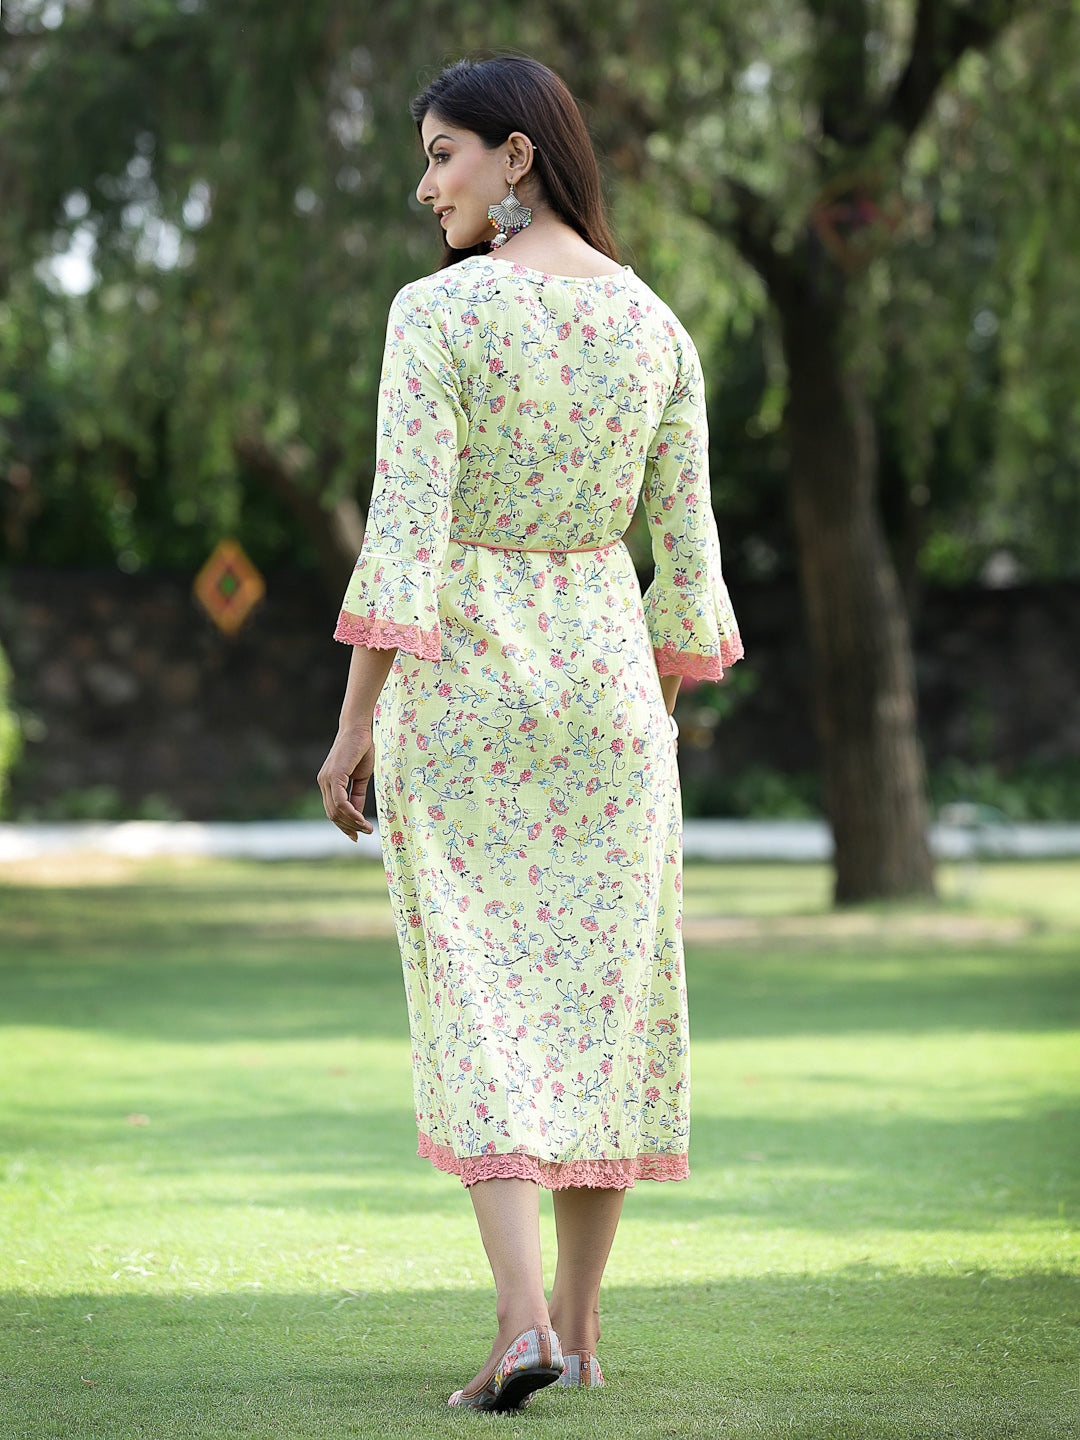 Juniper Lime Green Floral Printed Cotton Lacy Jacket Style Kurta With Thread Work & Dori At Waist